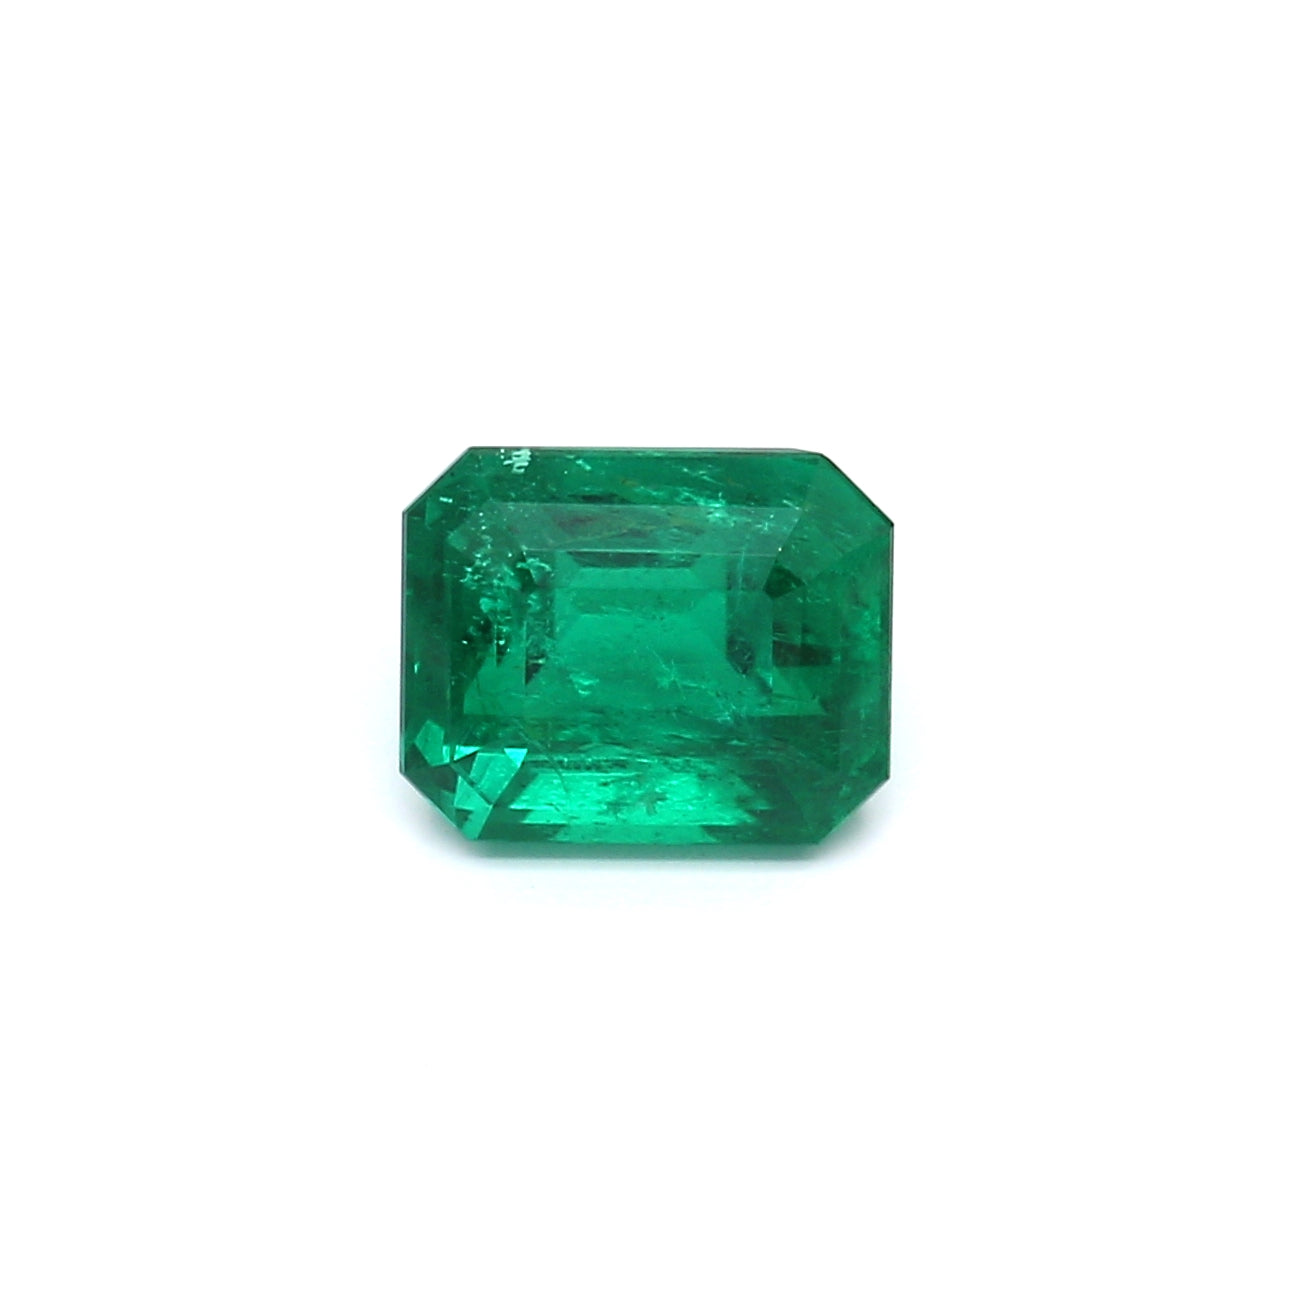 2.58ct Octagon Emerald, Moderate Oil, Afghanistan - 8.63 x 7.03 x 6.01mm